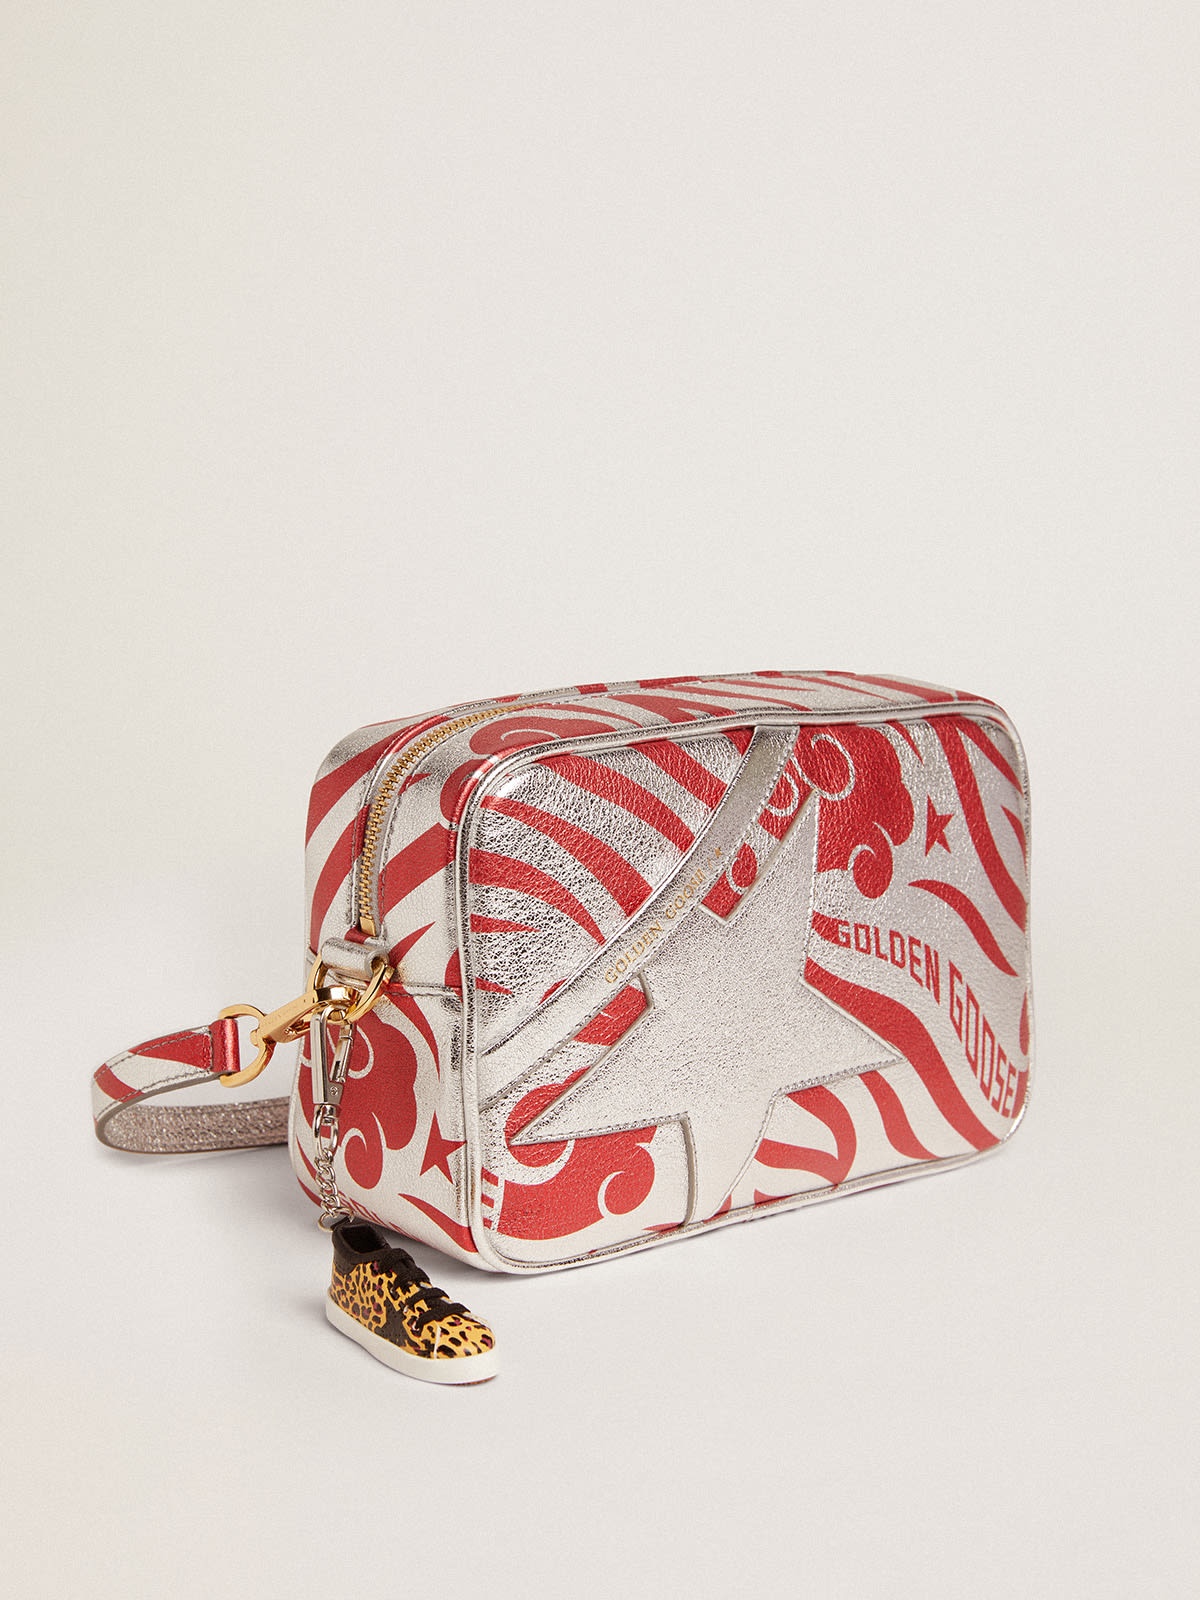 Star Bag in silver-colored laminated leather with tone-on-tone star and red tiger-striped CNY print - 5